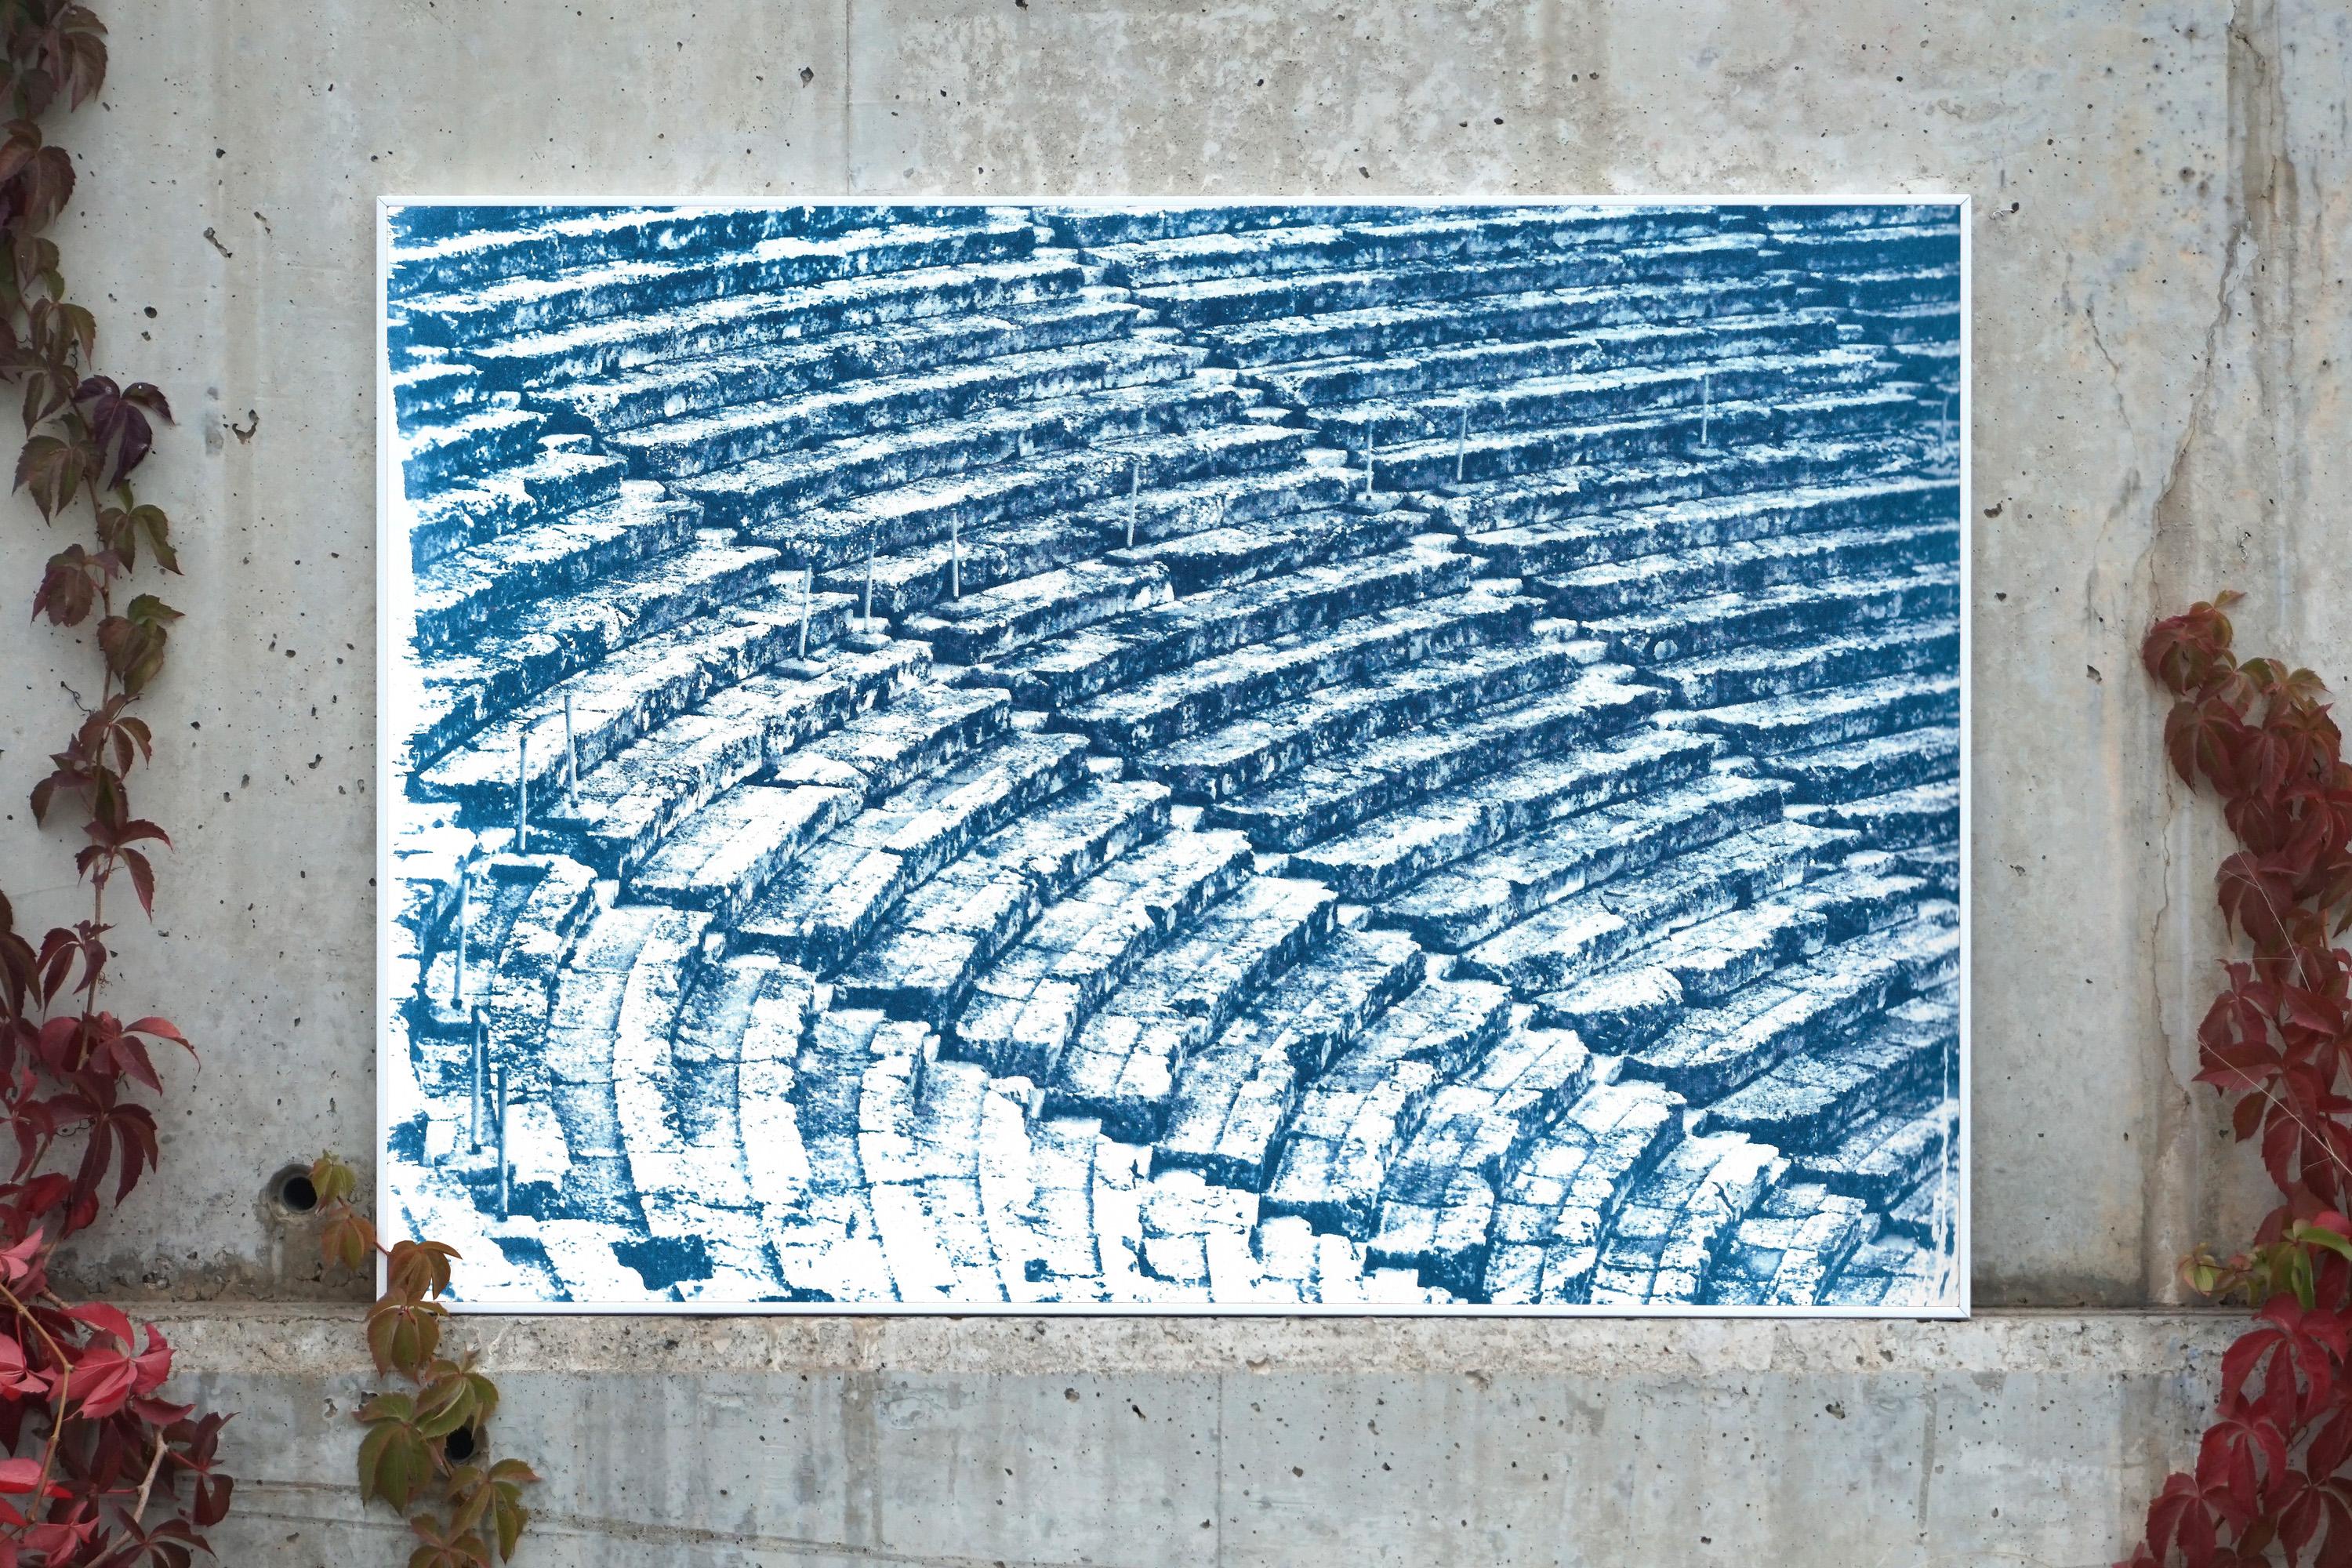 Diptych of Ancient Theatre, Multi-panel Cyanotype, Greek and Roman Architecture - Modern Photograph by Kind of Cyan